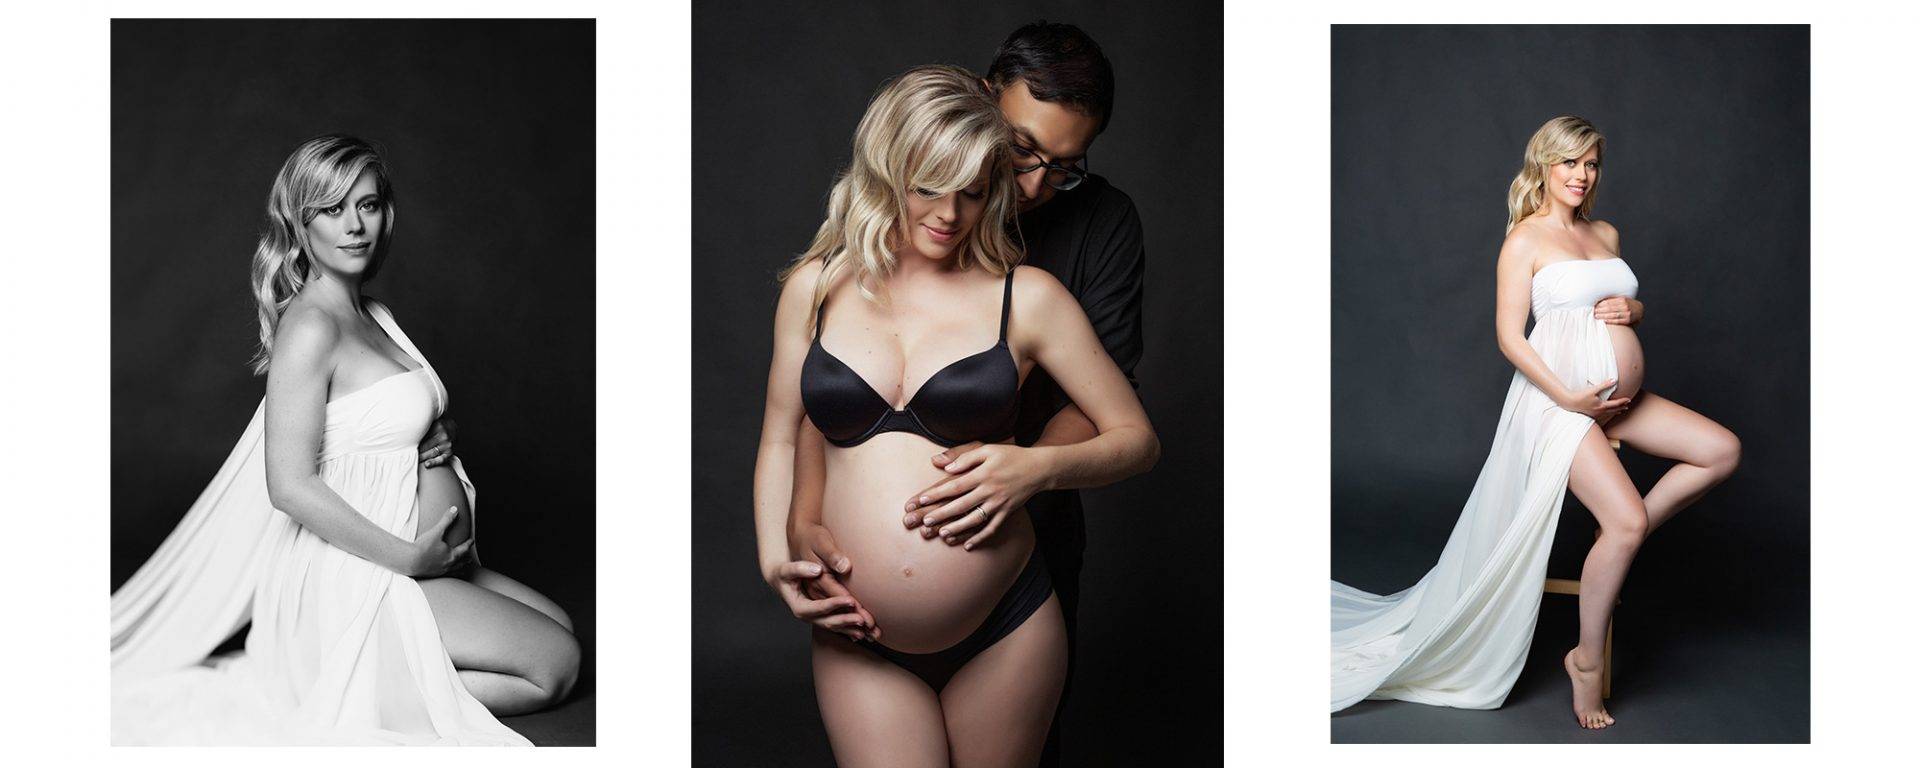 A maternity series of photos with a blonde woman and her husband.